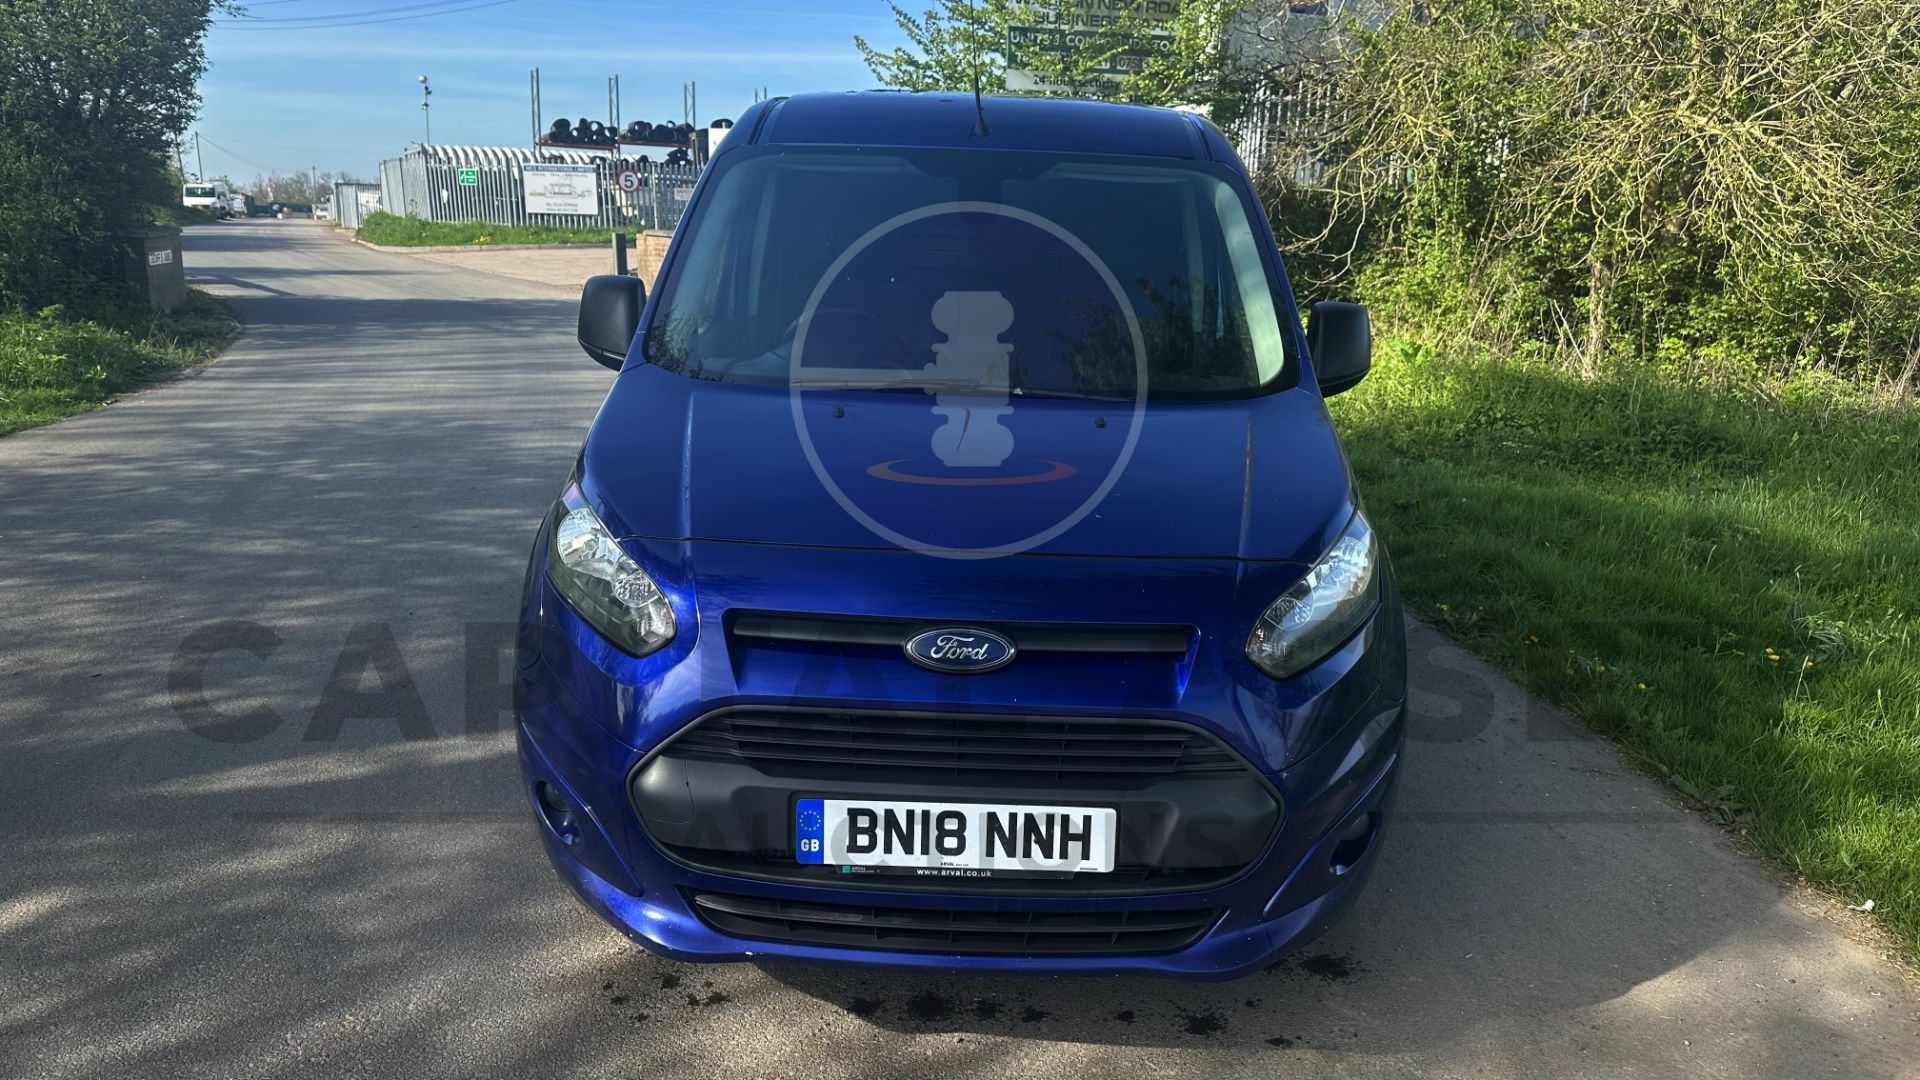 (On Sale) FORD TRANSIT CONNECT *TREND EDITION* PANEL VAN (2018 -EURO 6) 1.5 TDCI *AIR CON* (1 OWNER) - Image 4 of 38